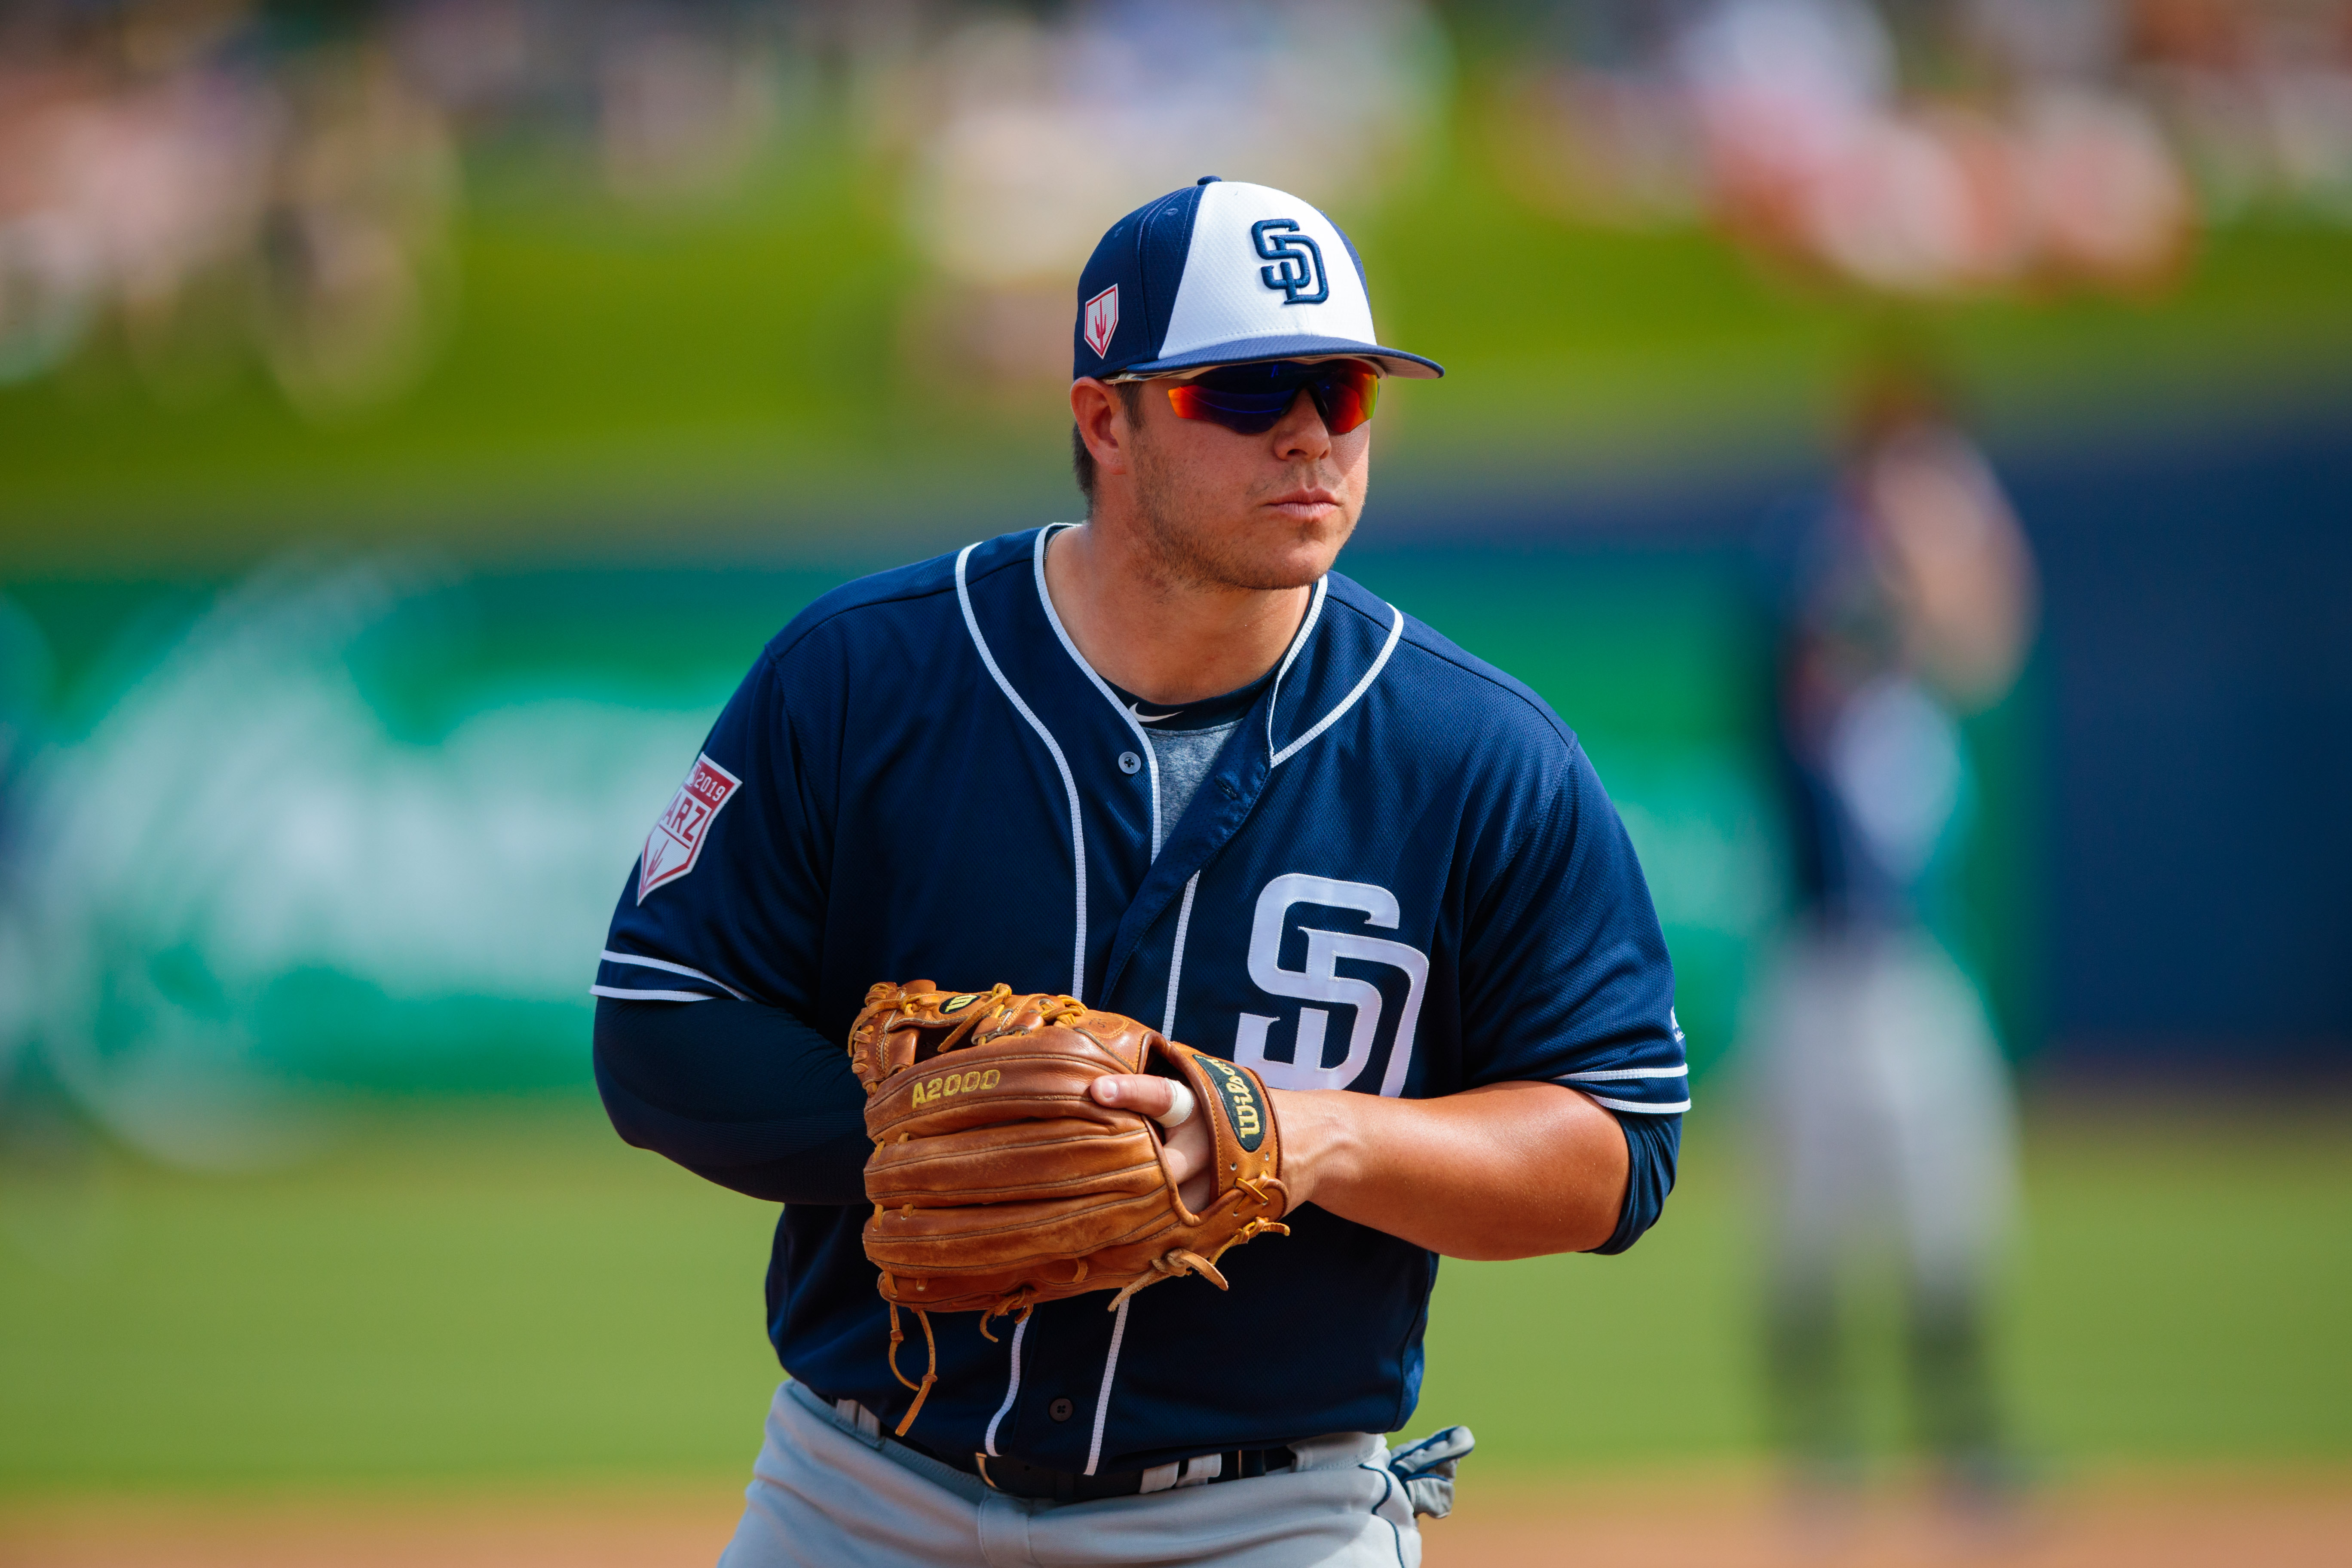 France Promoted to Padres